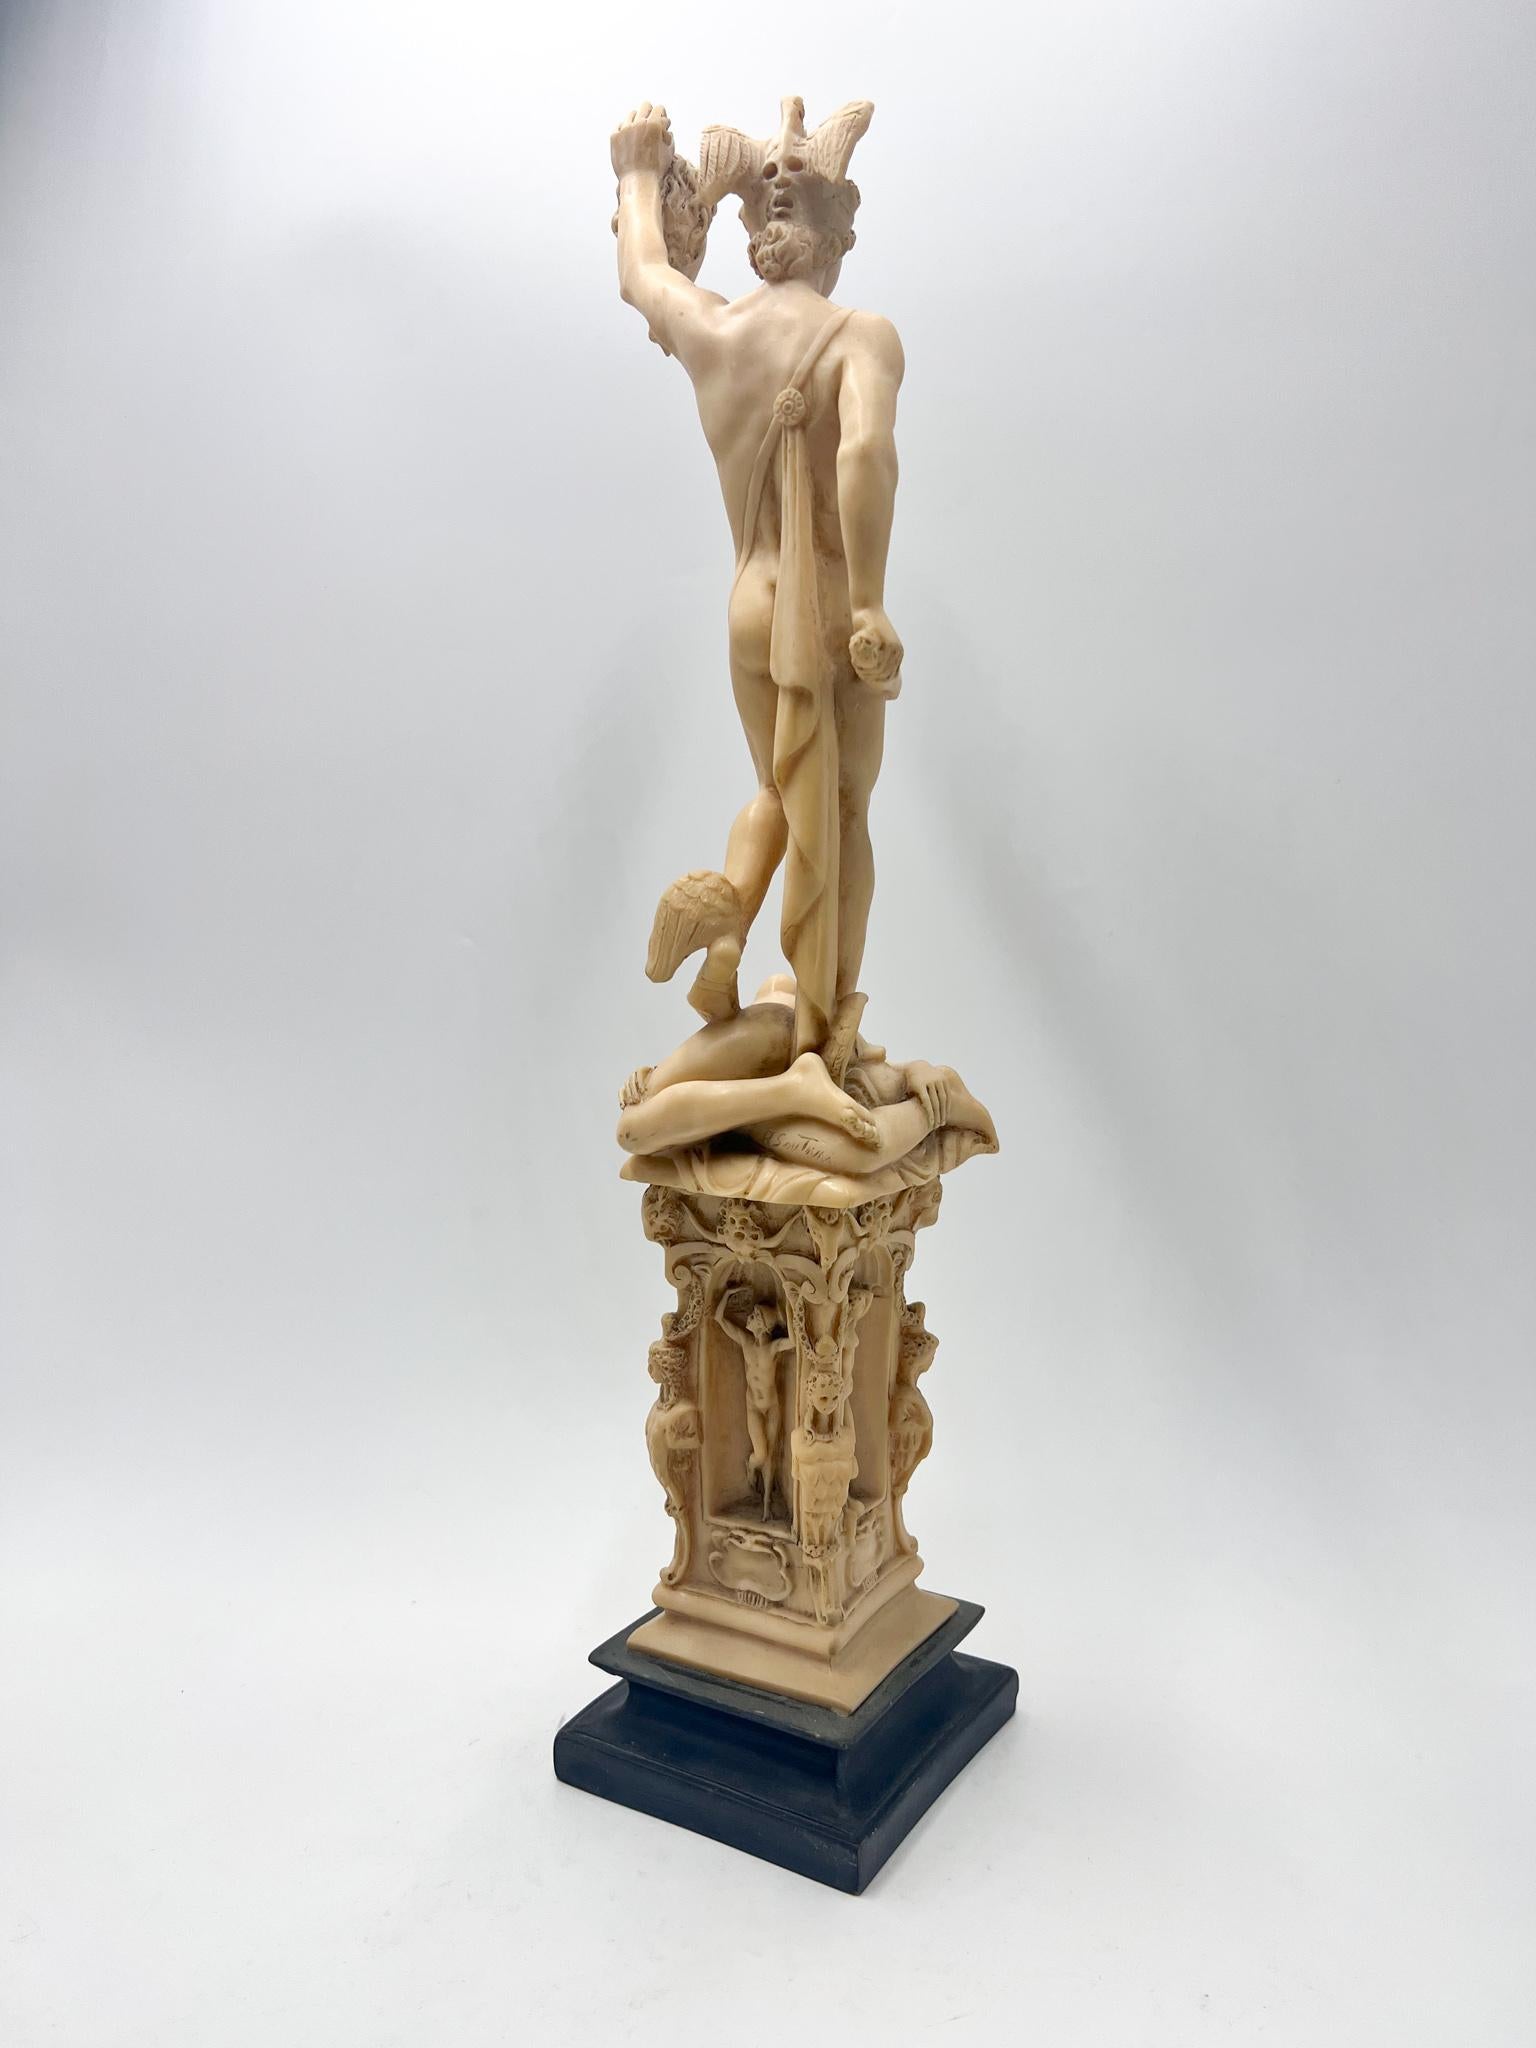 Mid-20th Century Resin Sculpture Depicting Perseus from the 50s